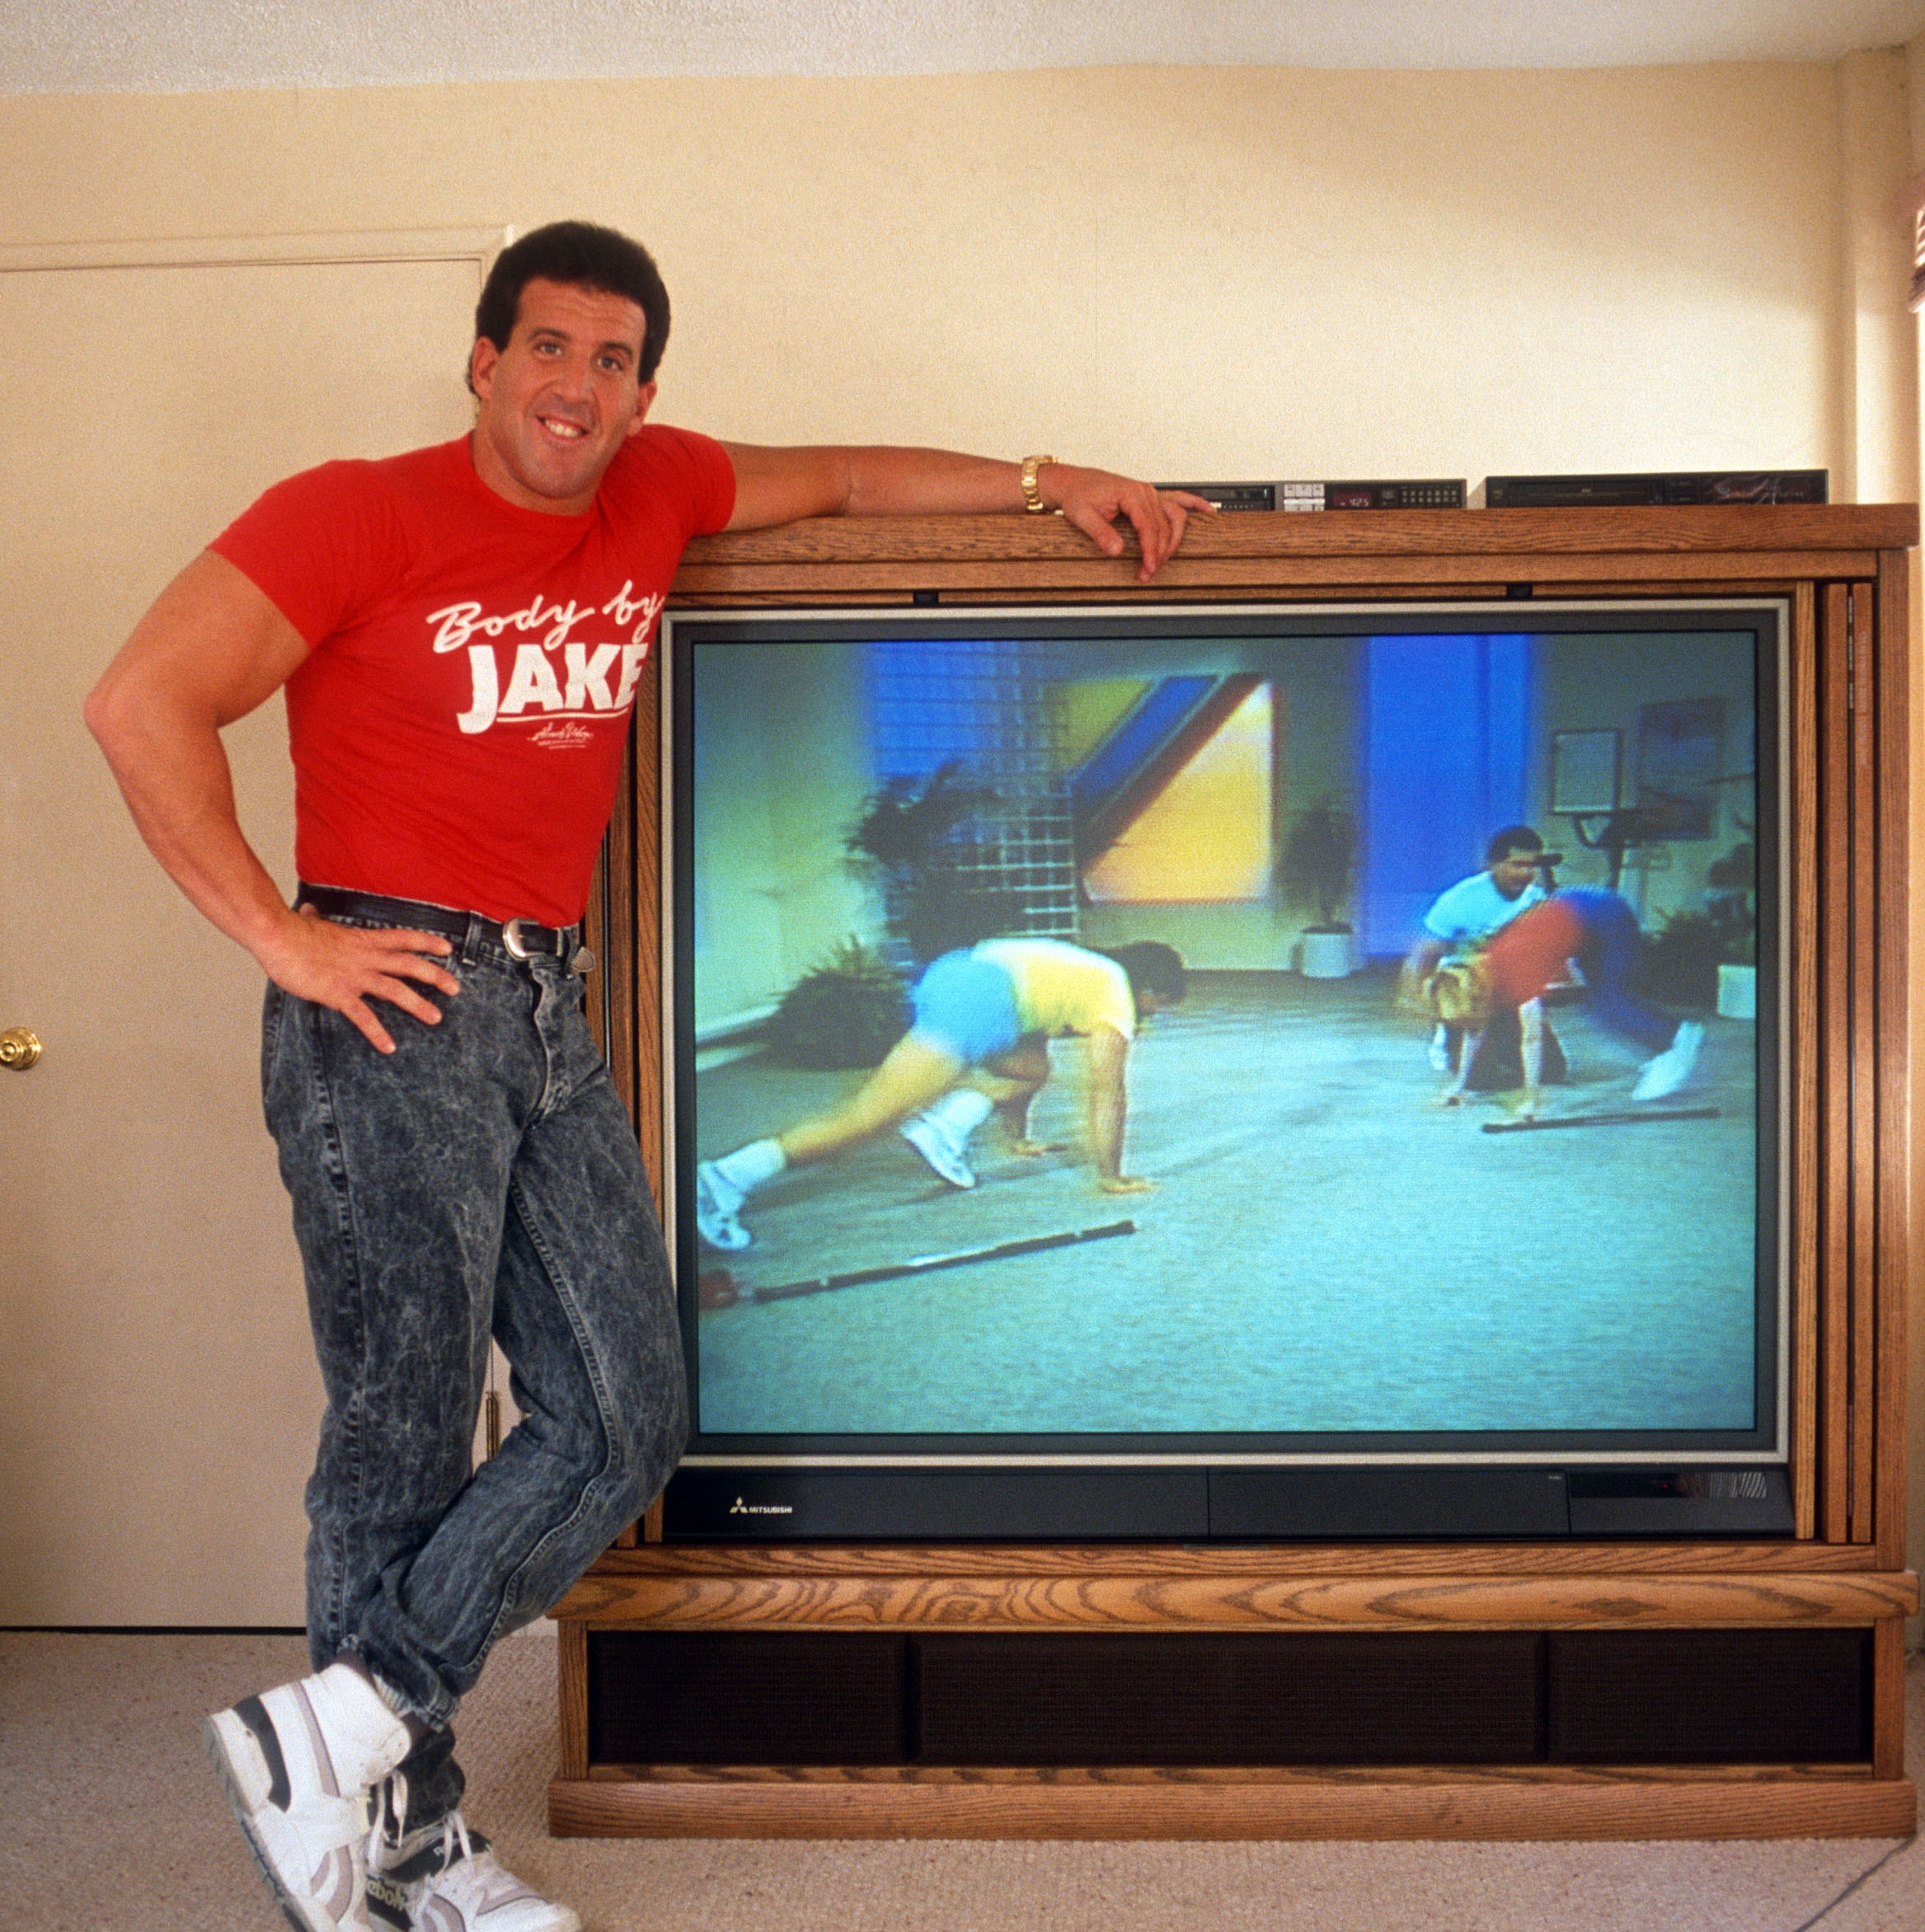 Body by Jake standing next to giant TV